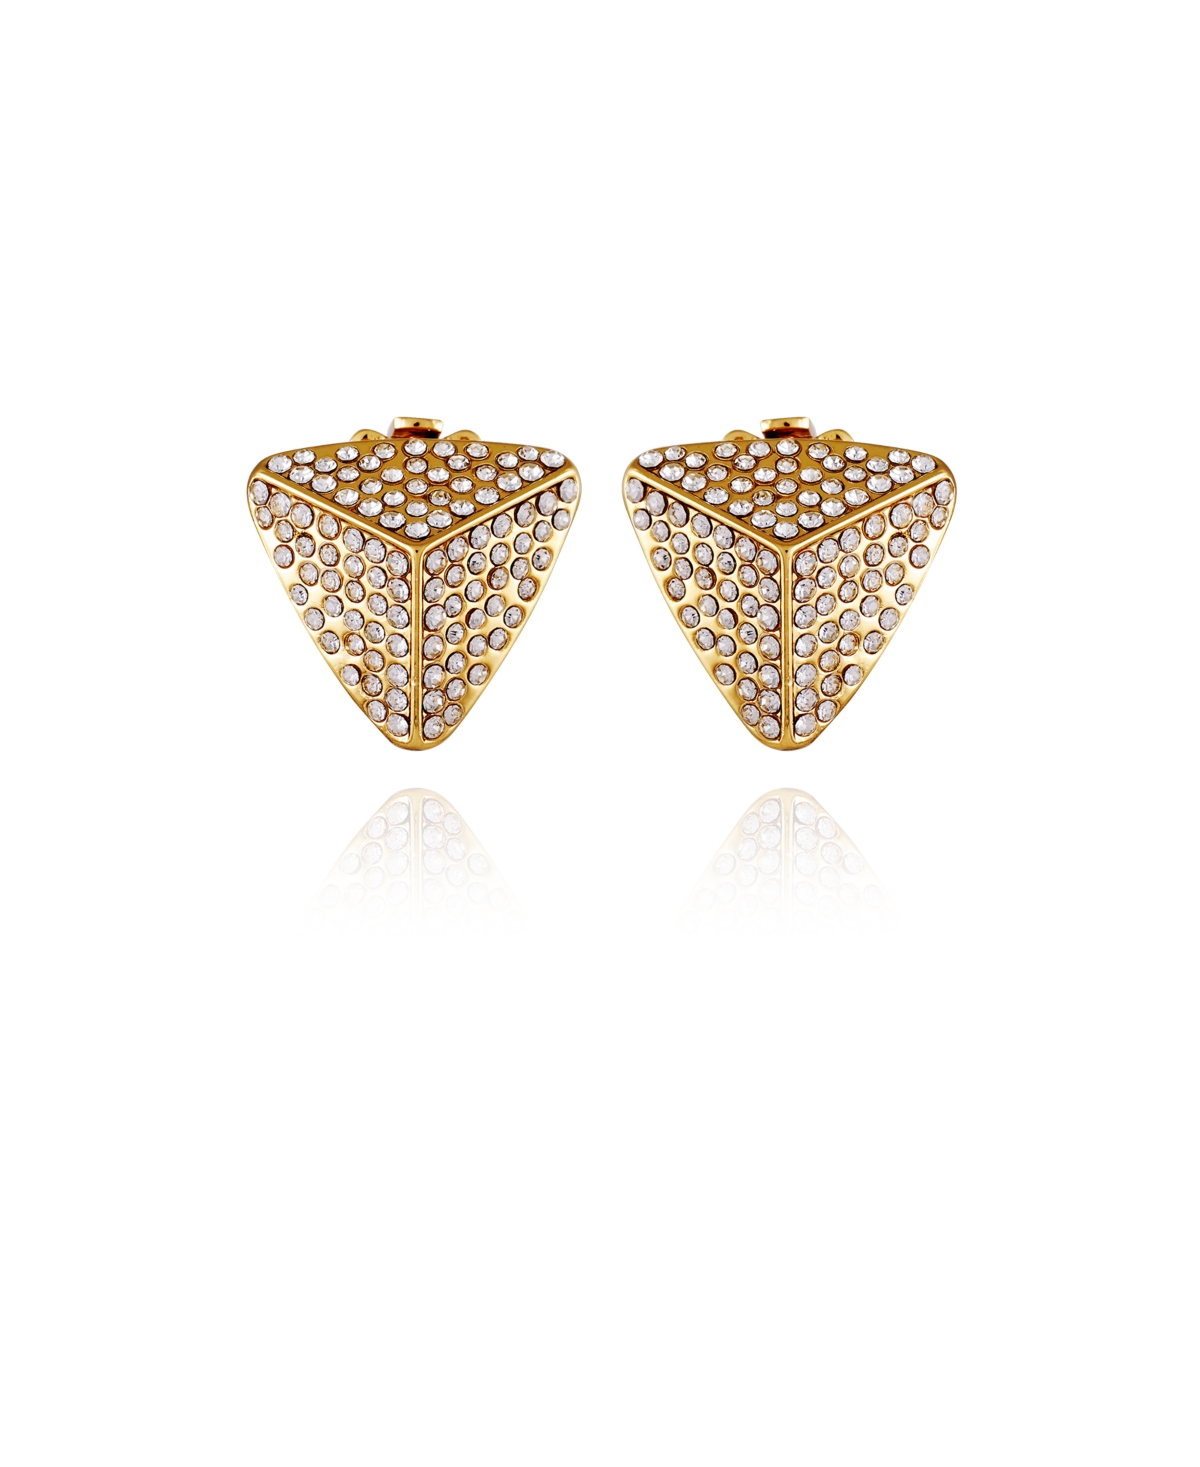 Gold-Tone Pyramid Glass Stone Clip On Stud Earrings - Gold